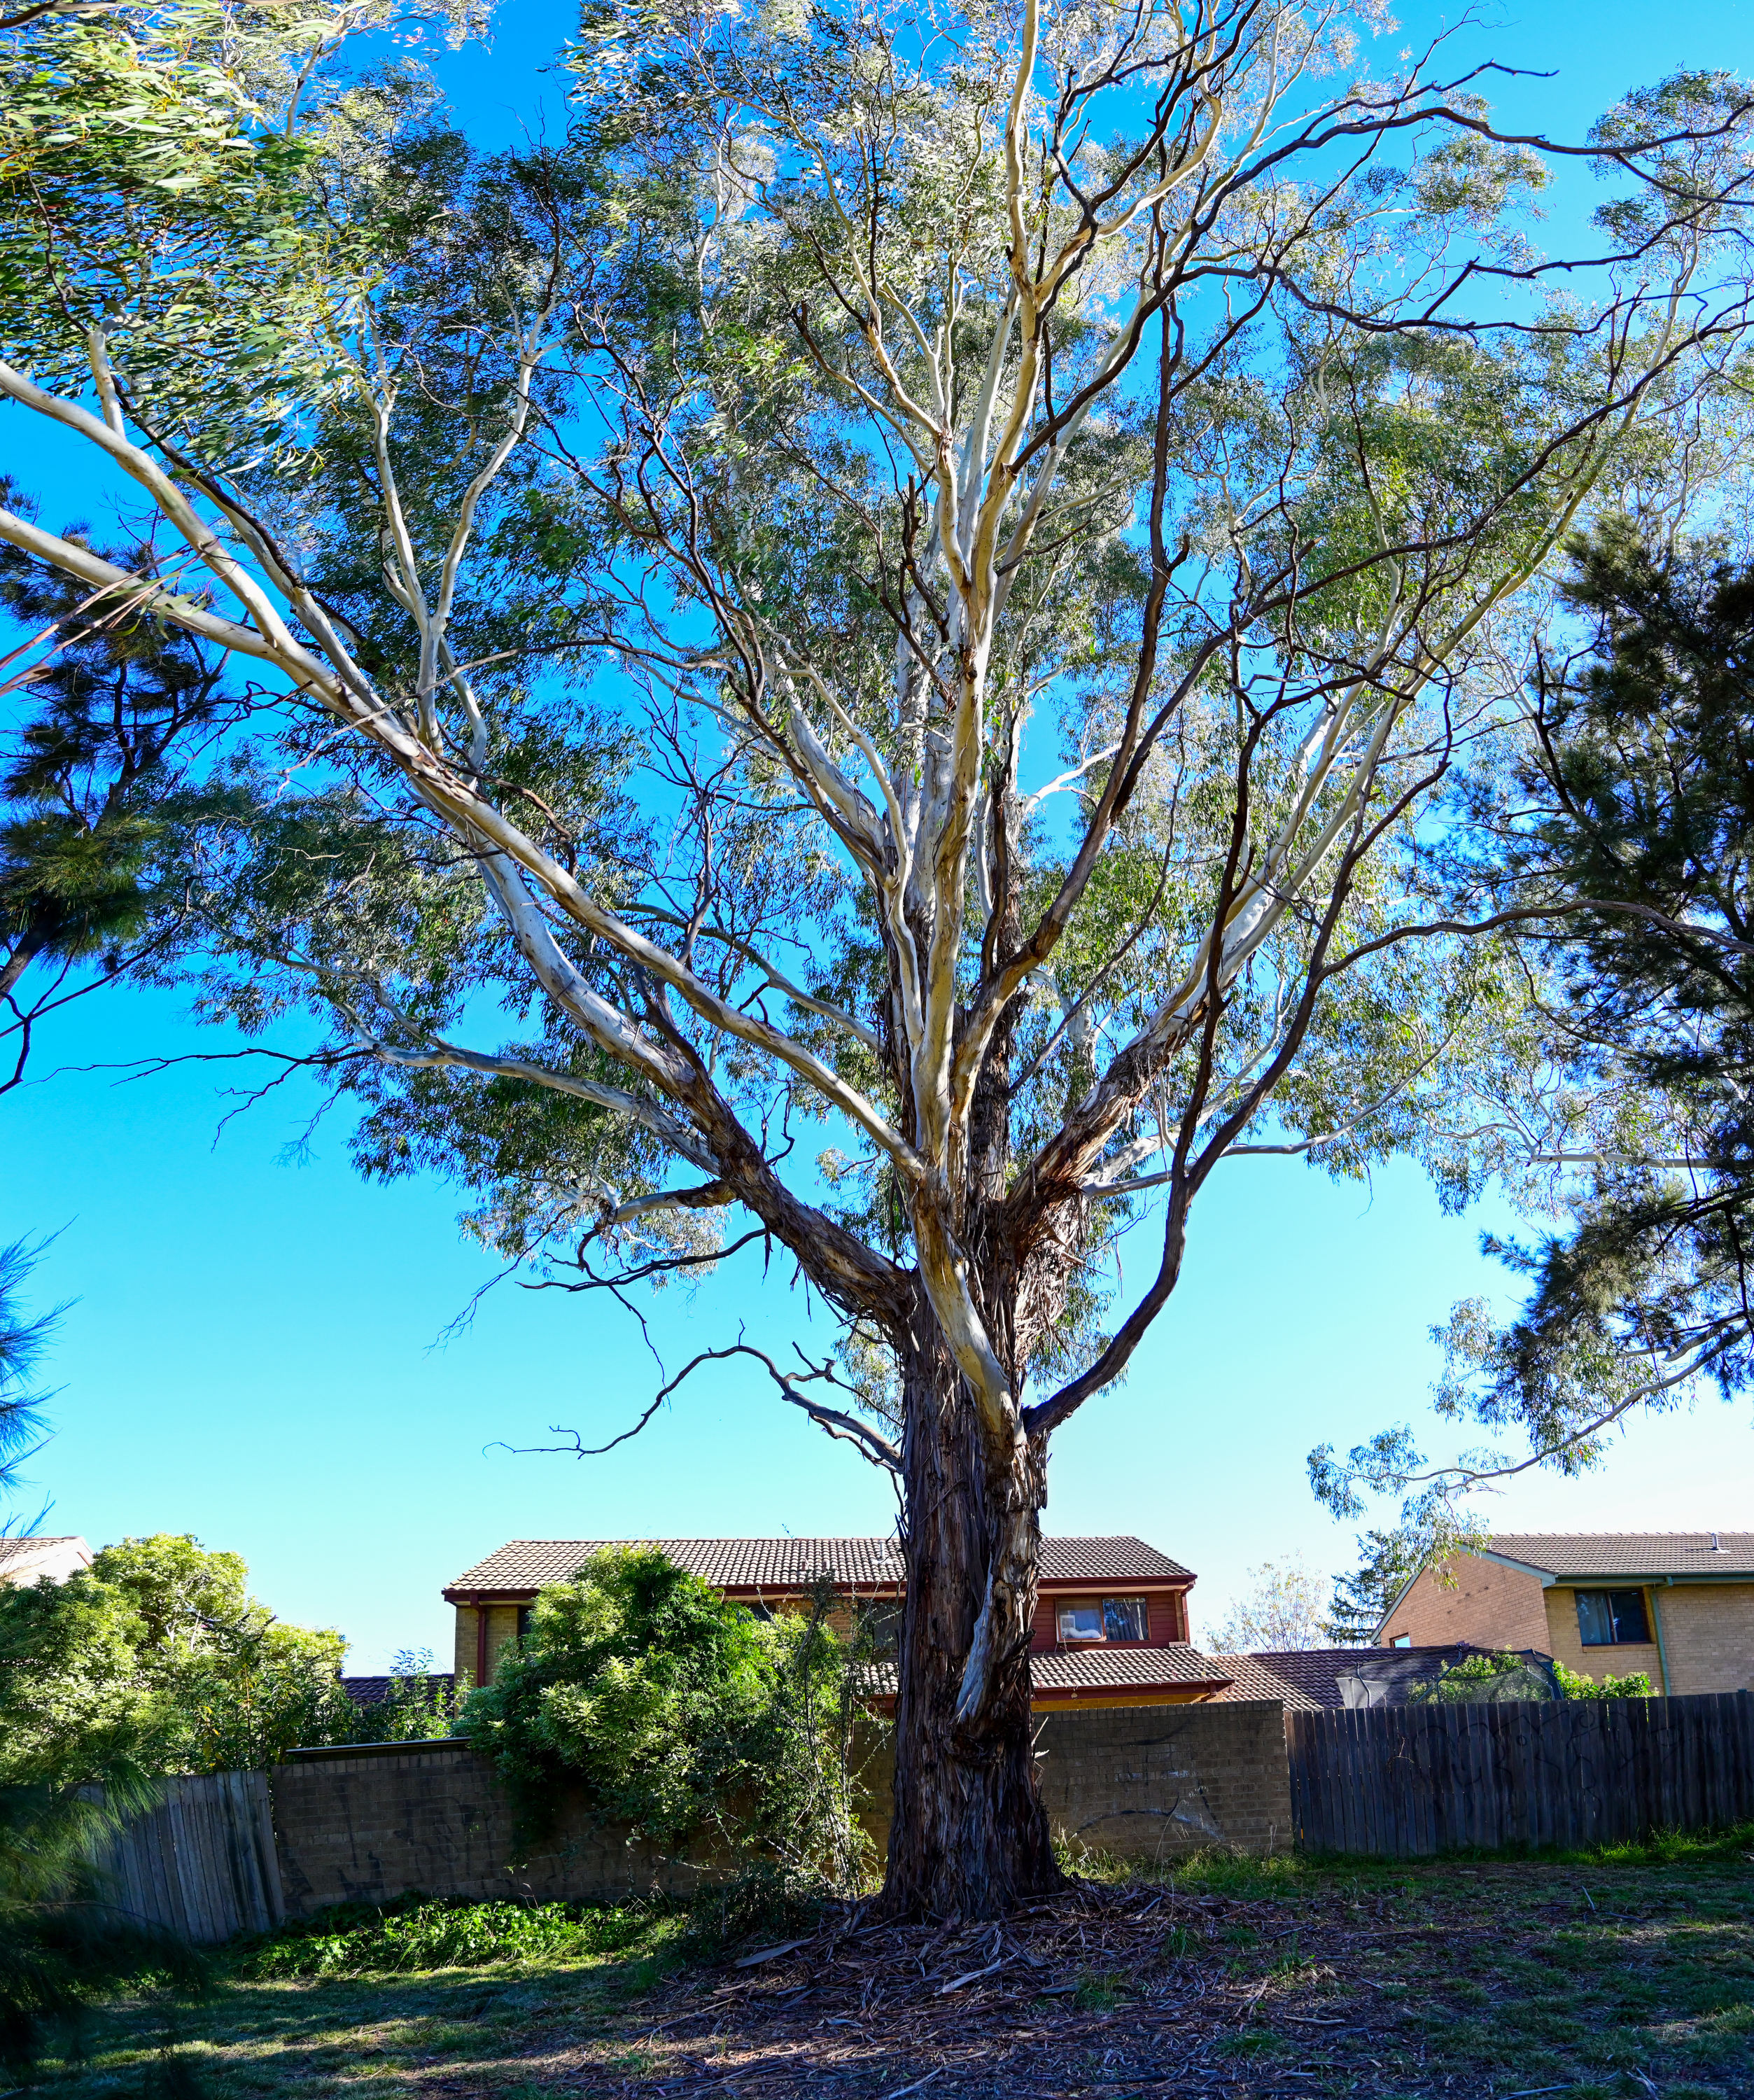 A huge Ribbon Gum rises high above a backyard fence and houses behind it agains a light blue sky.